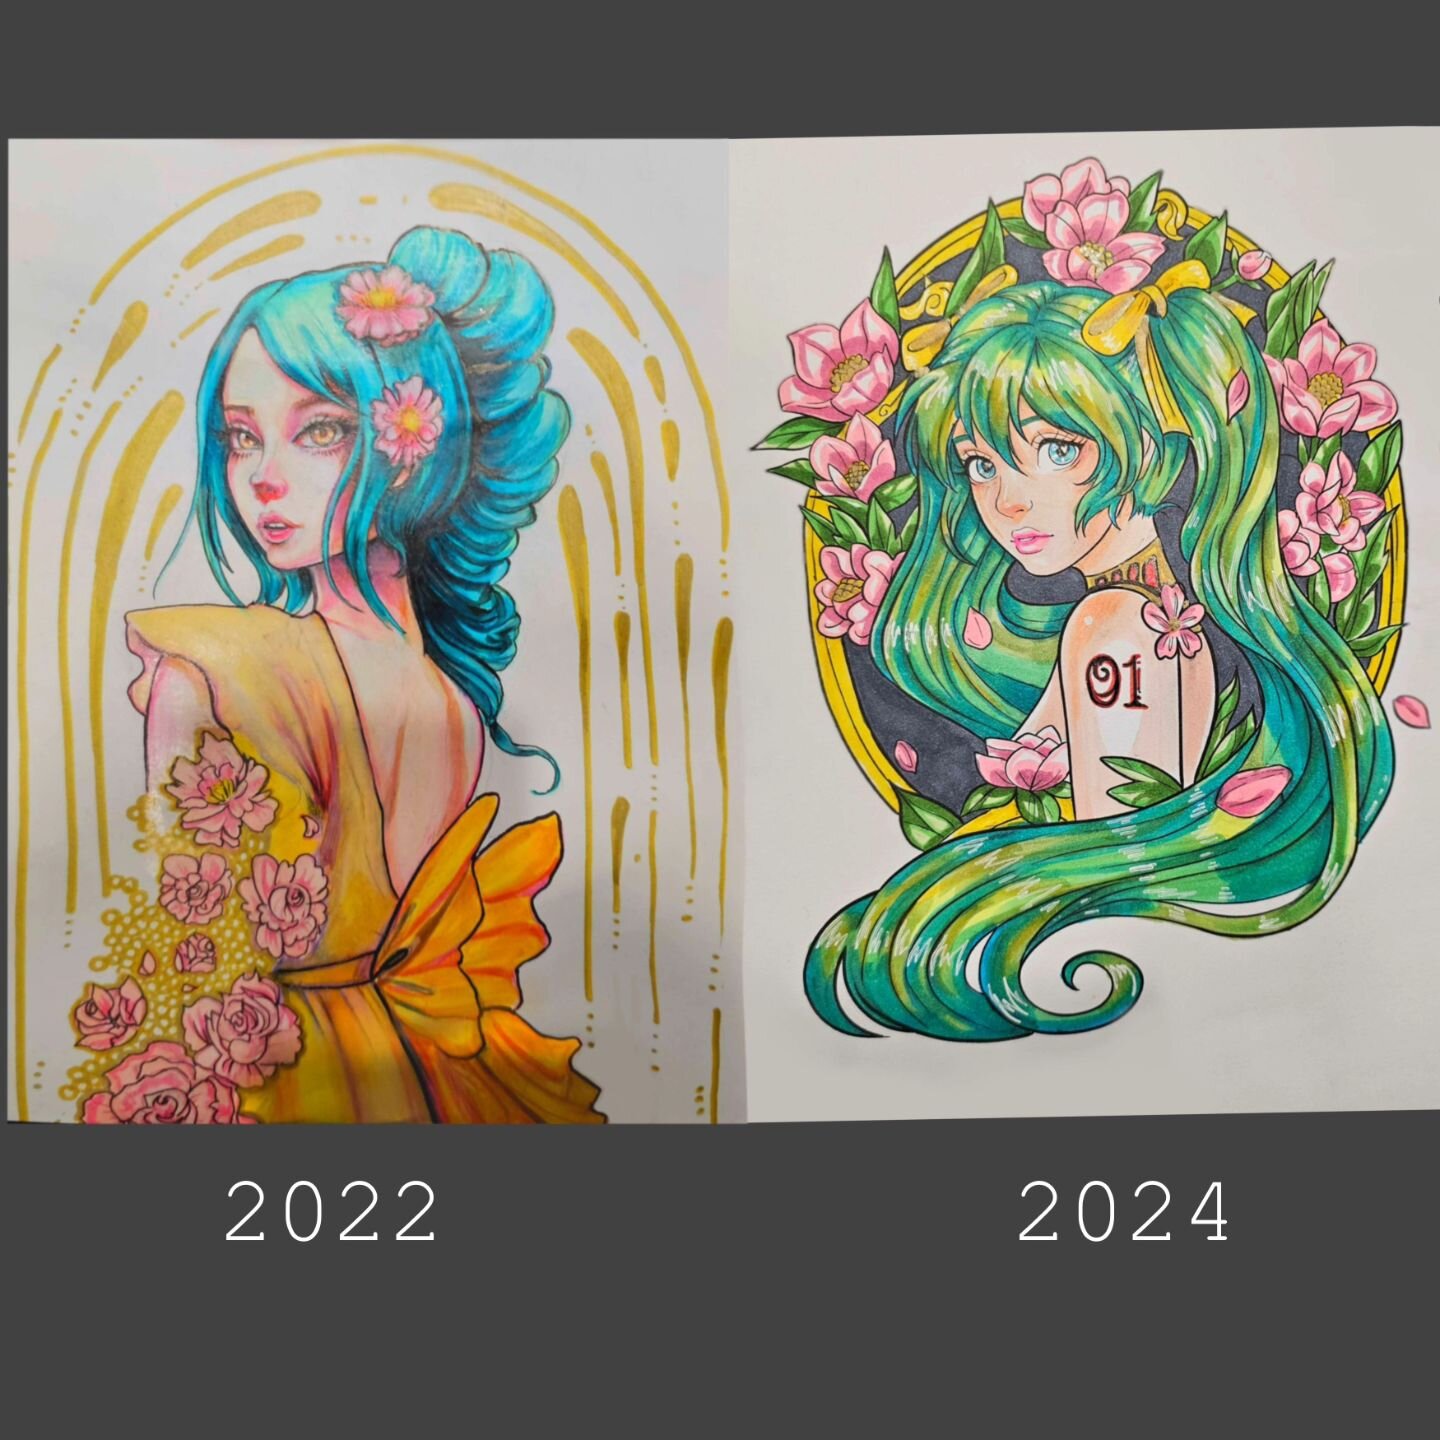 Just a post to show the evolution in my art over a few years by redrawing an older piece. Neither piece is bad- they're just very different stylistically. I'm proud of the growth I've made in my art over the years drawing daily, and I know I still ha